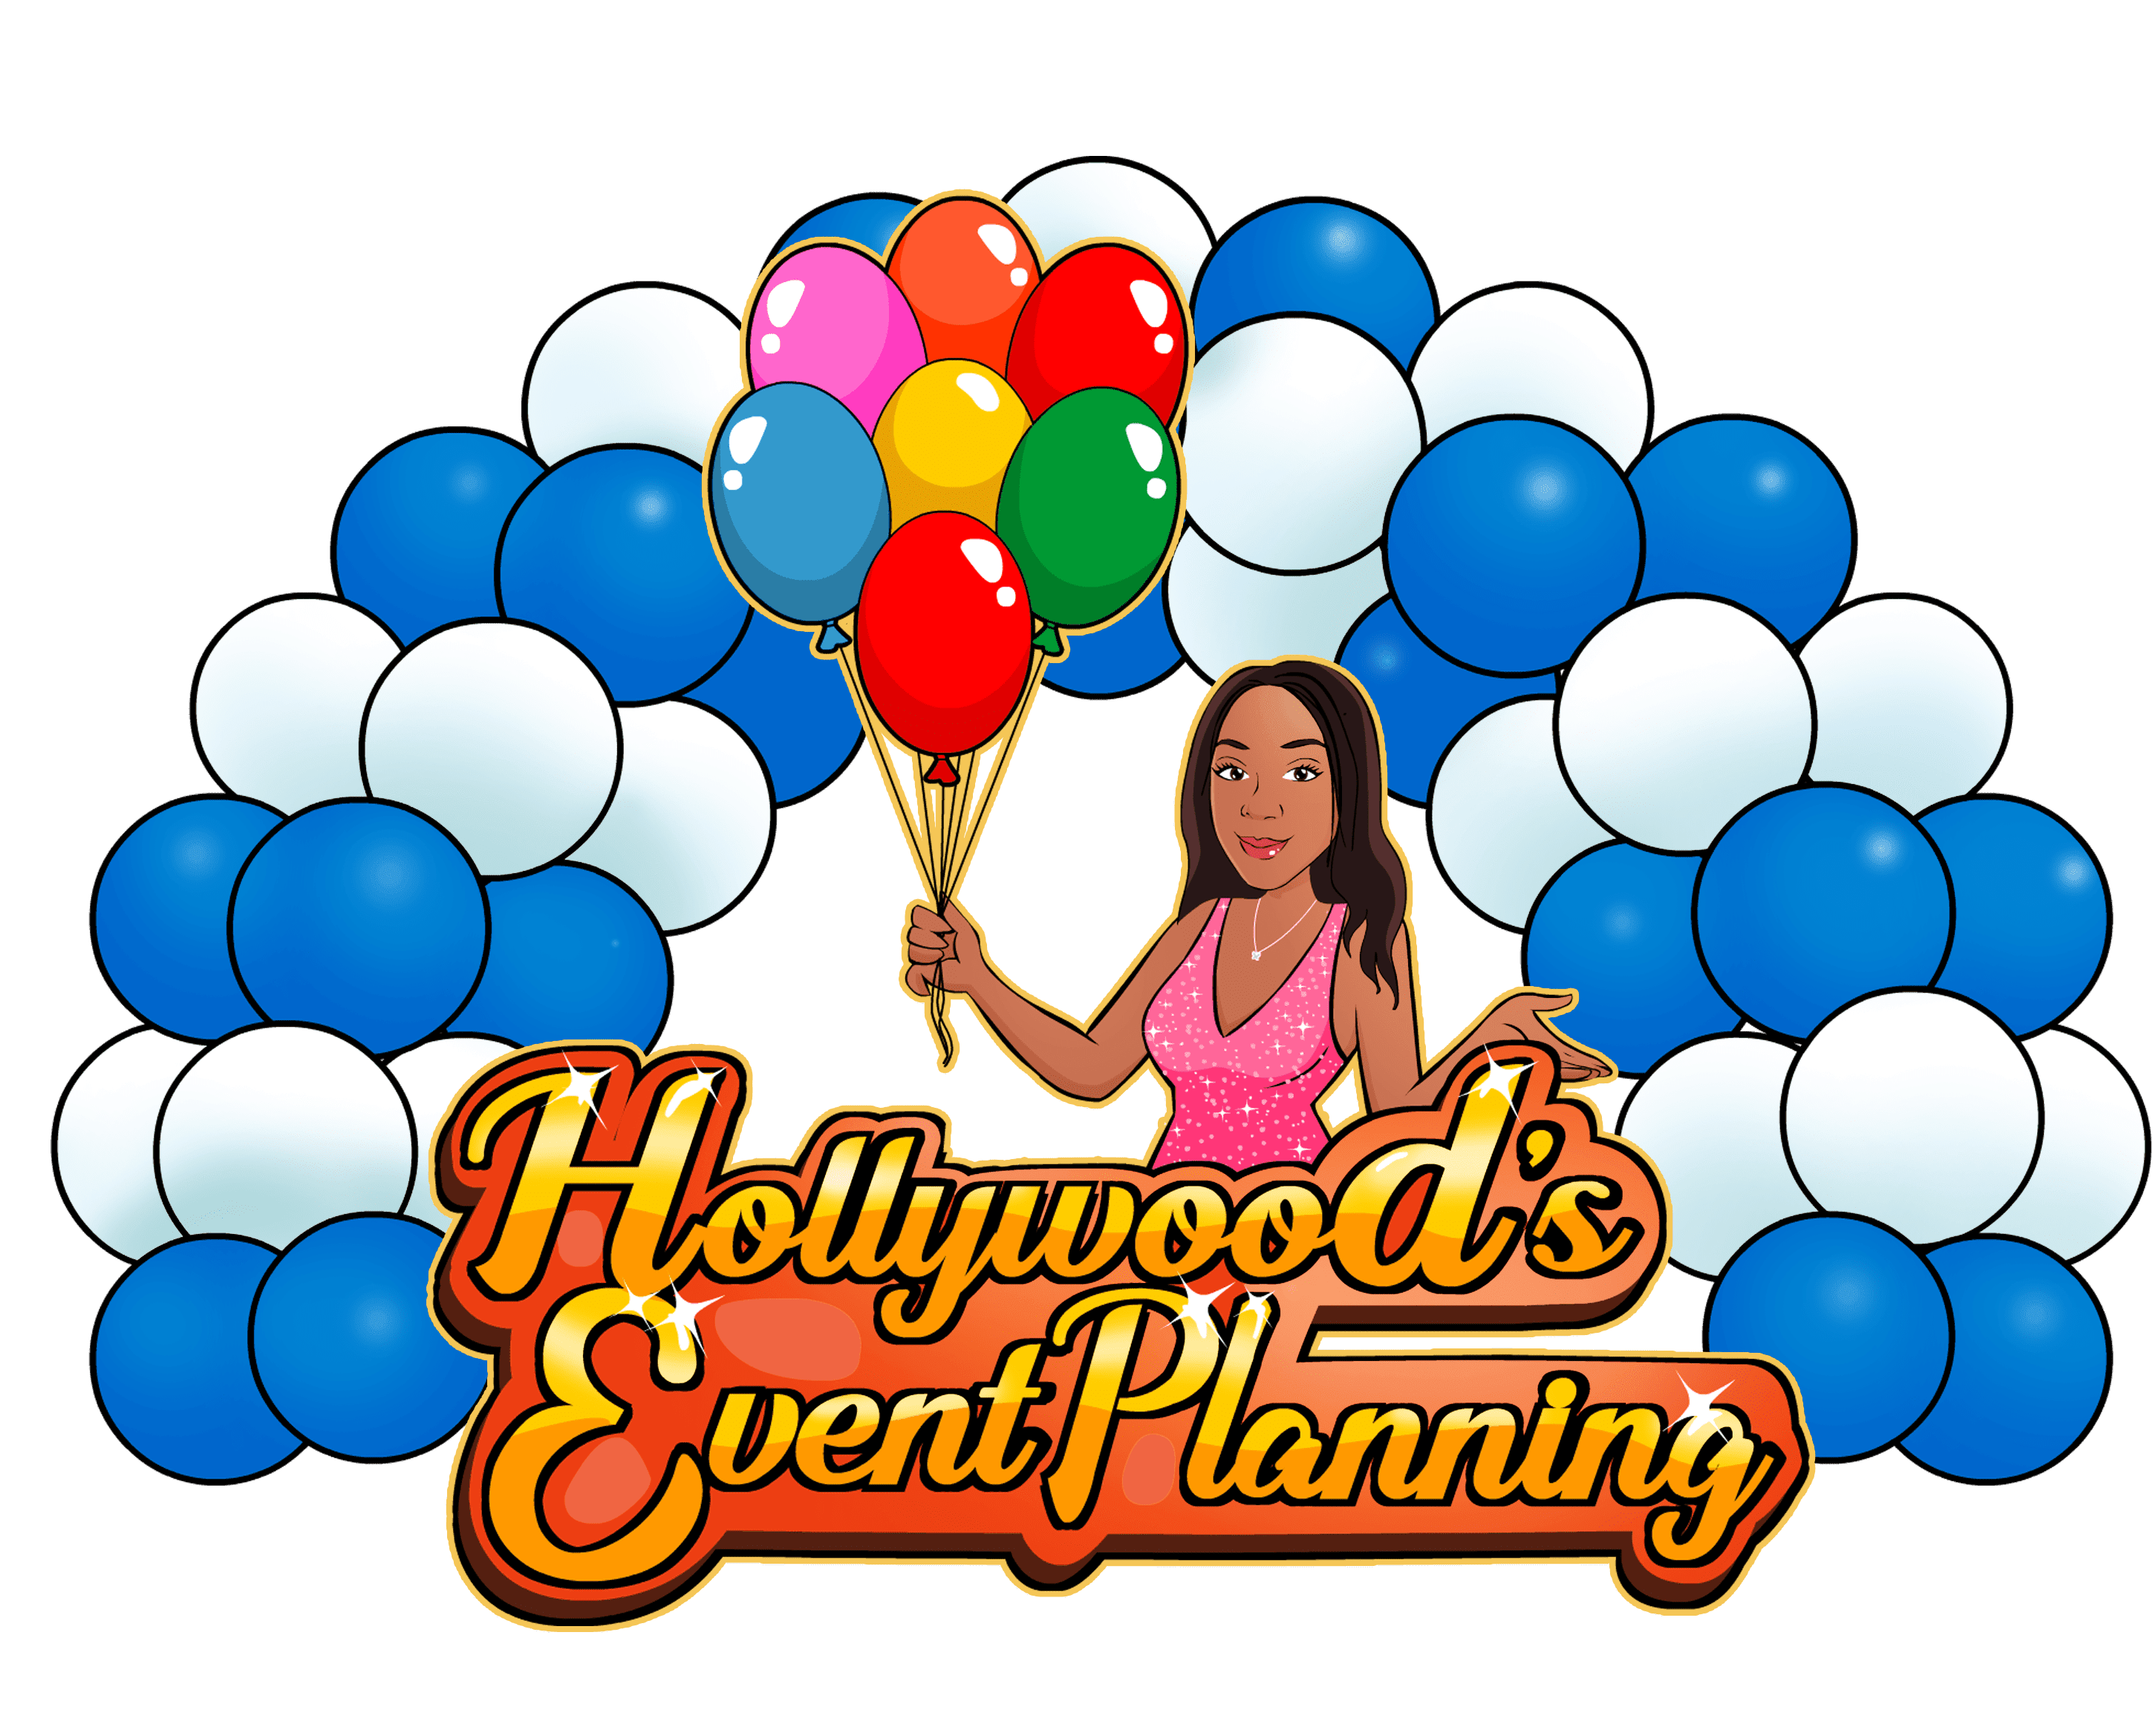 Hollywood’s Event Planning